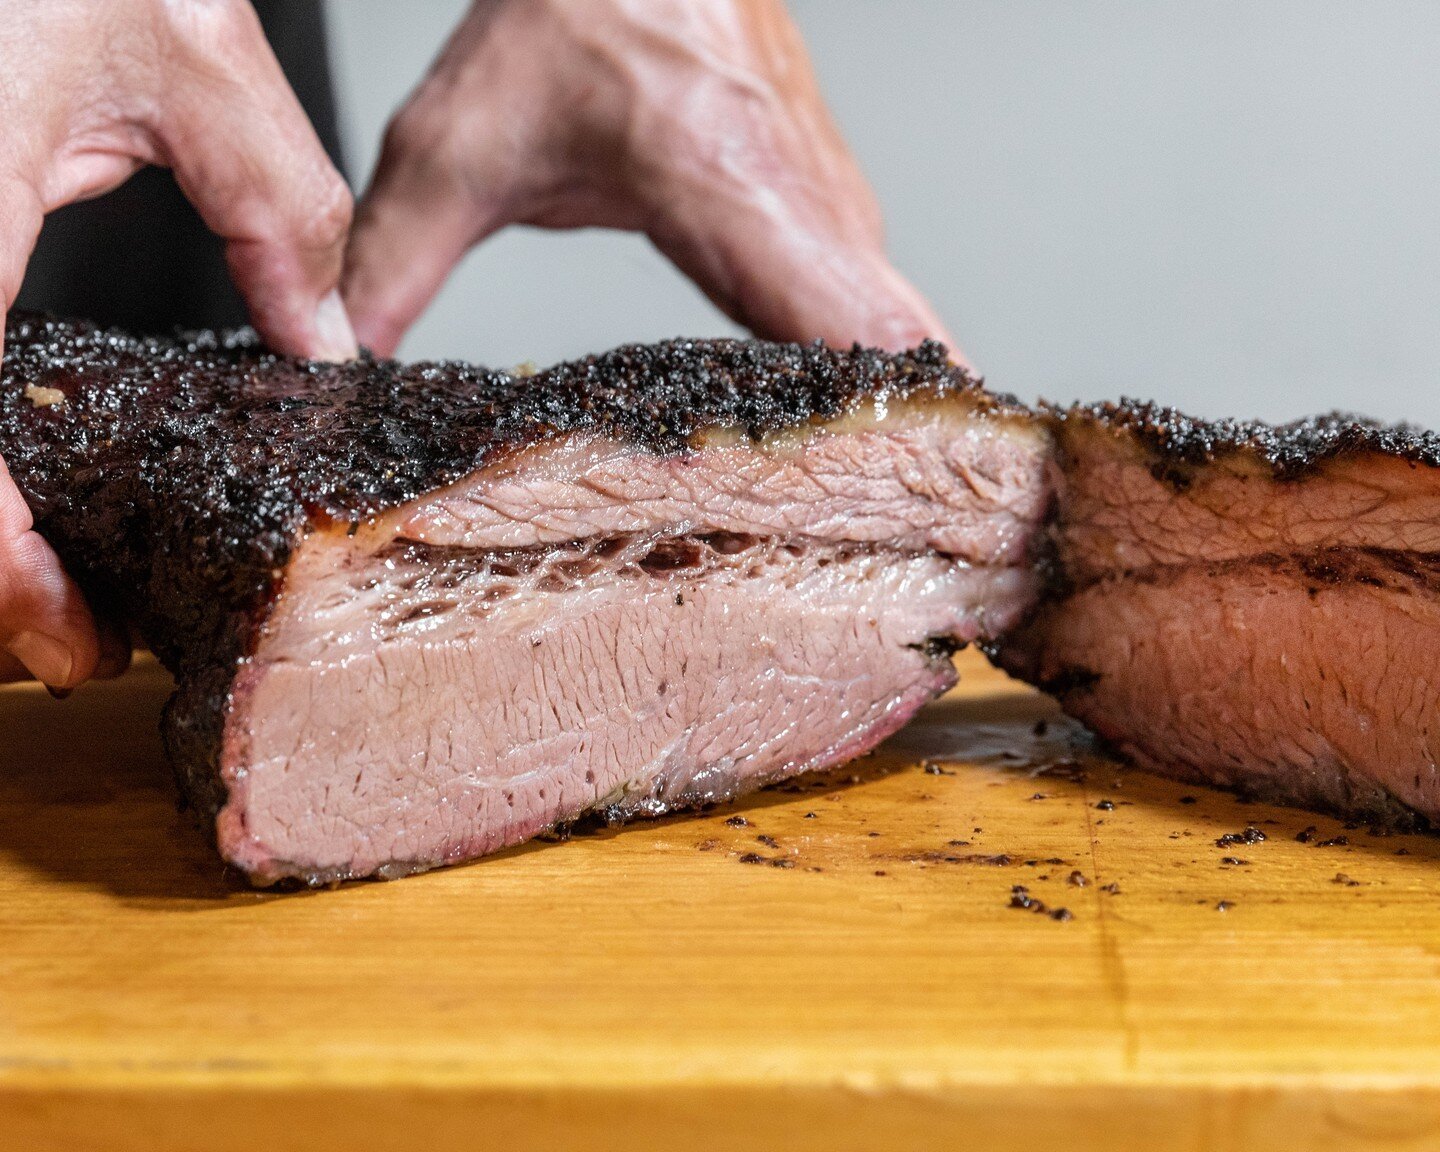 Don't forget the slow-smoked Texas Brisket for Passover! Pre-order today to secure your brisket, available by the 1/2 lb! 
📸: @caraharmanphoto